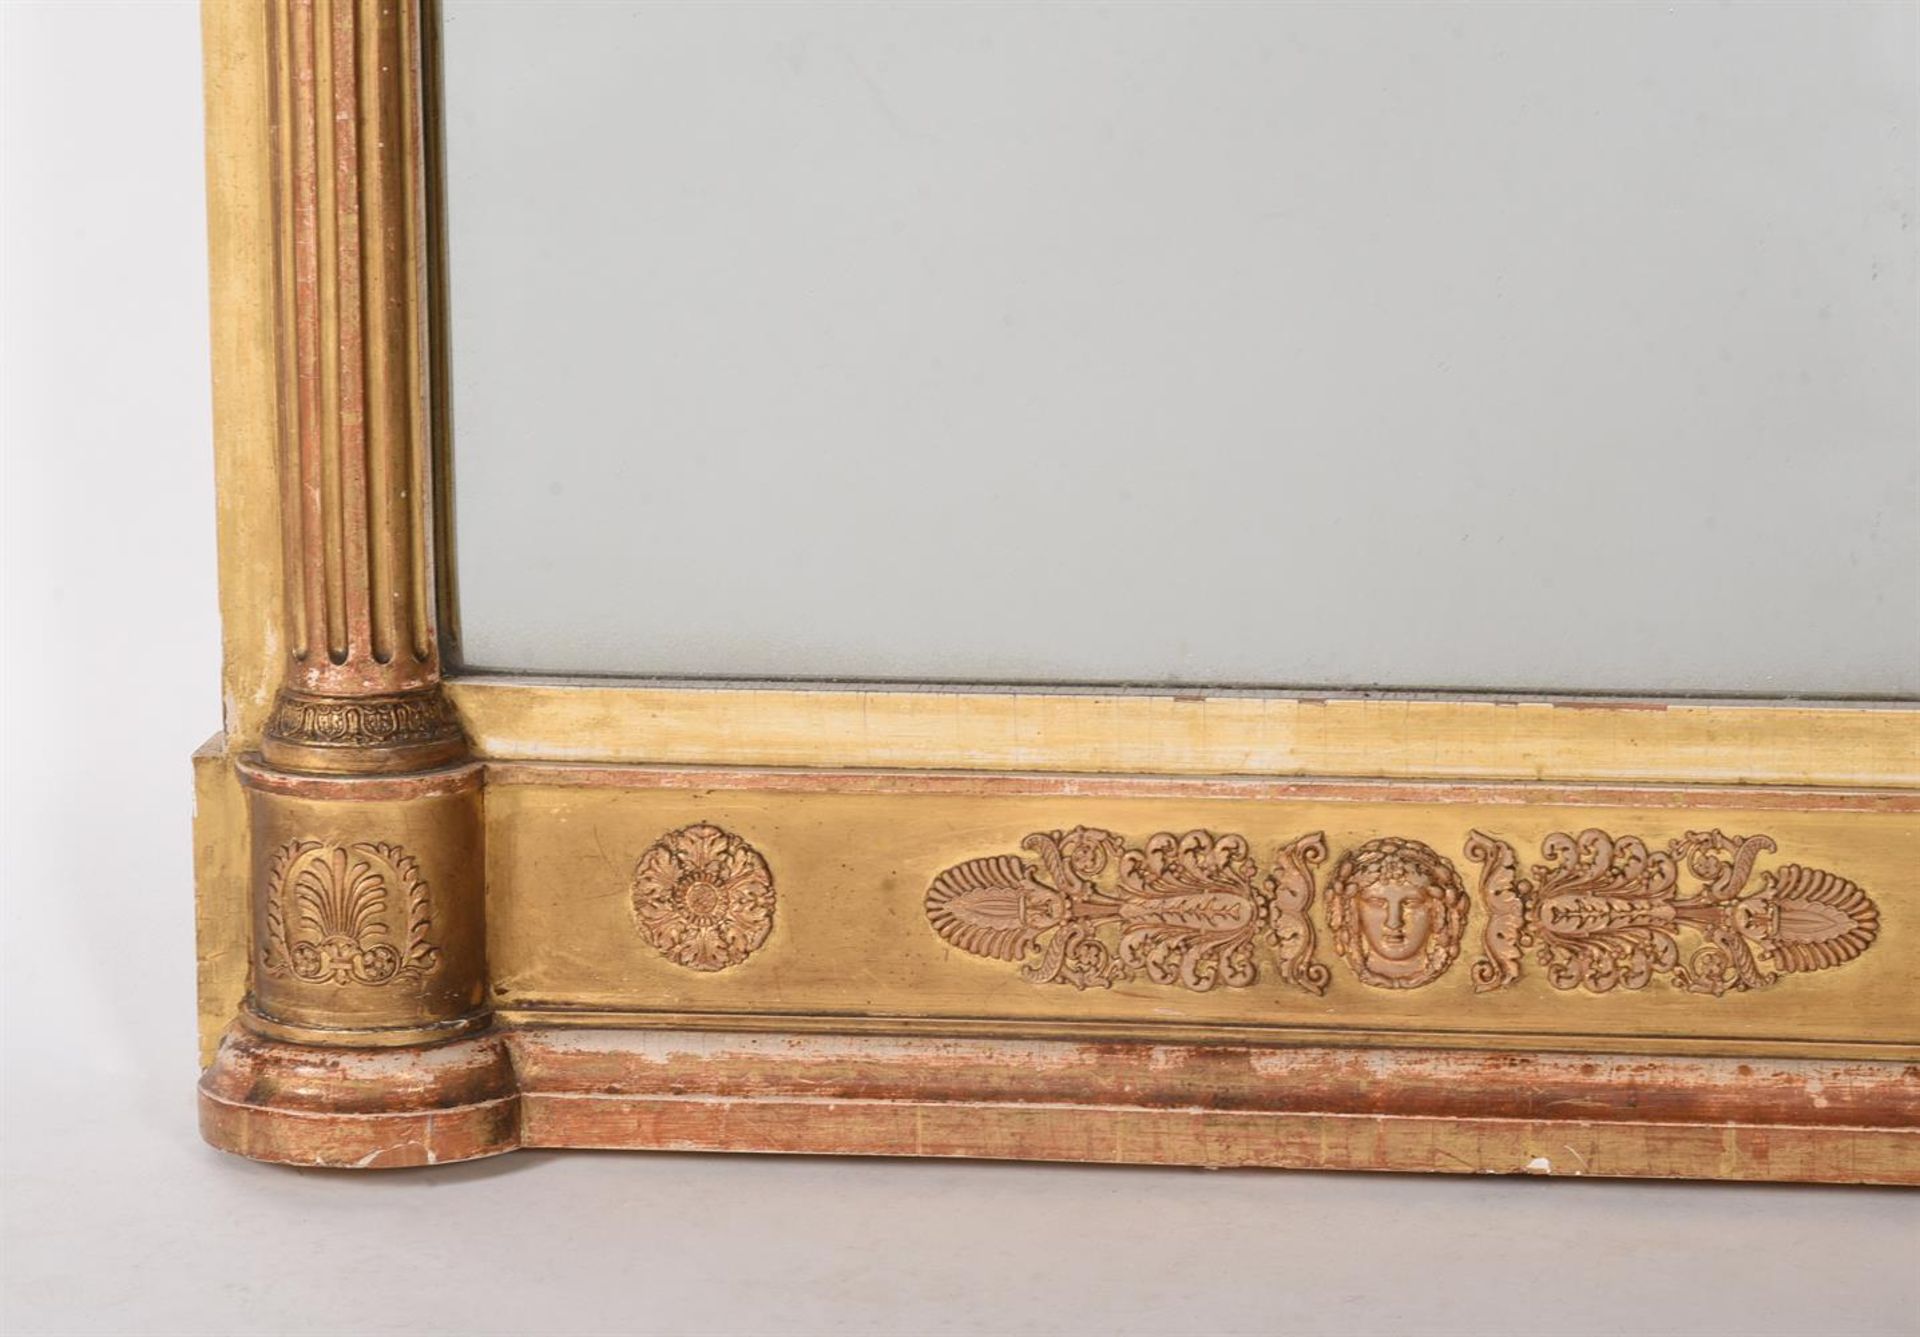 AN EMPIRE GILTWOOD AND GILT GESSO PIER MIRROR, FRENCH, EARLY 19TH CENTURY - Image 3 of 4